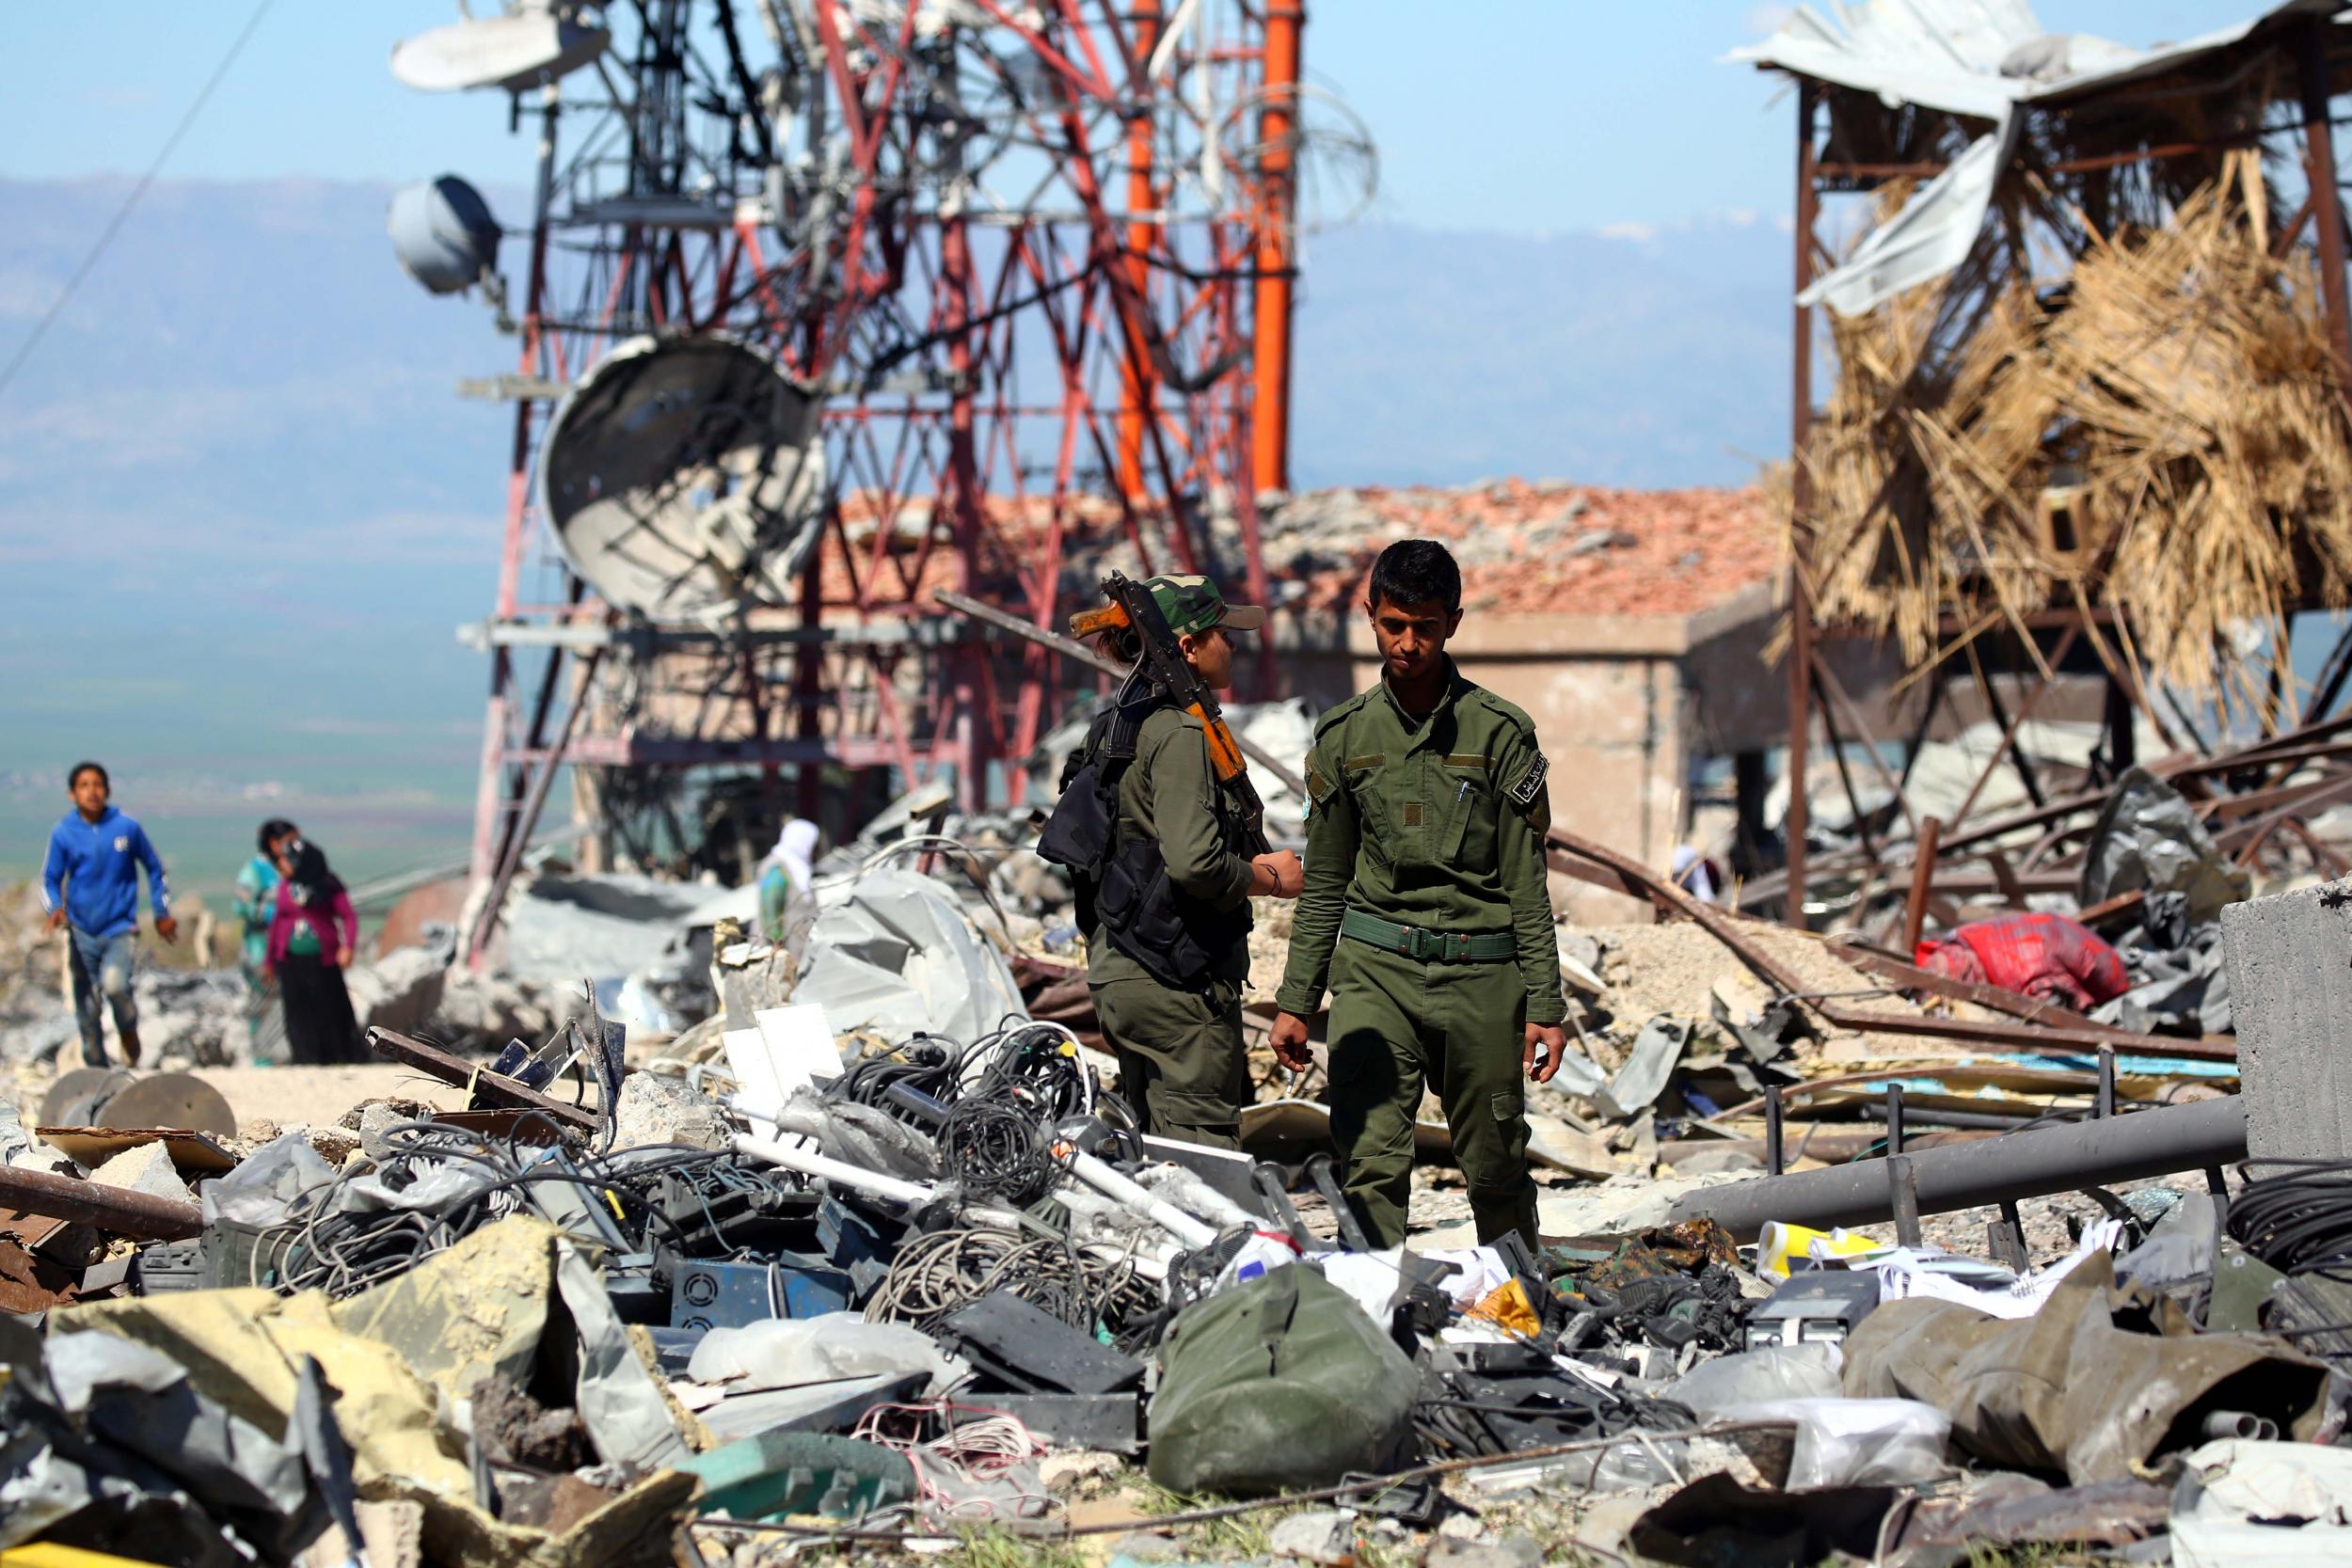 The aftermath of a Turkish airstrike is inspected by members of the Kurdish People's Protection Units (YPG), seen by the United States as a key ally in the fight against Isis